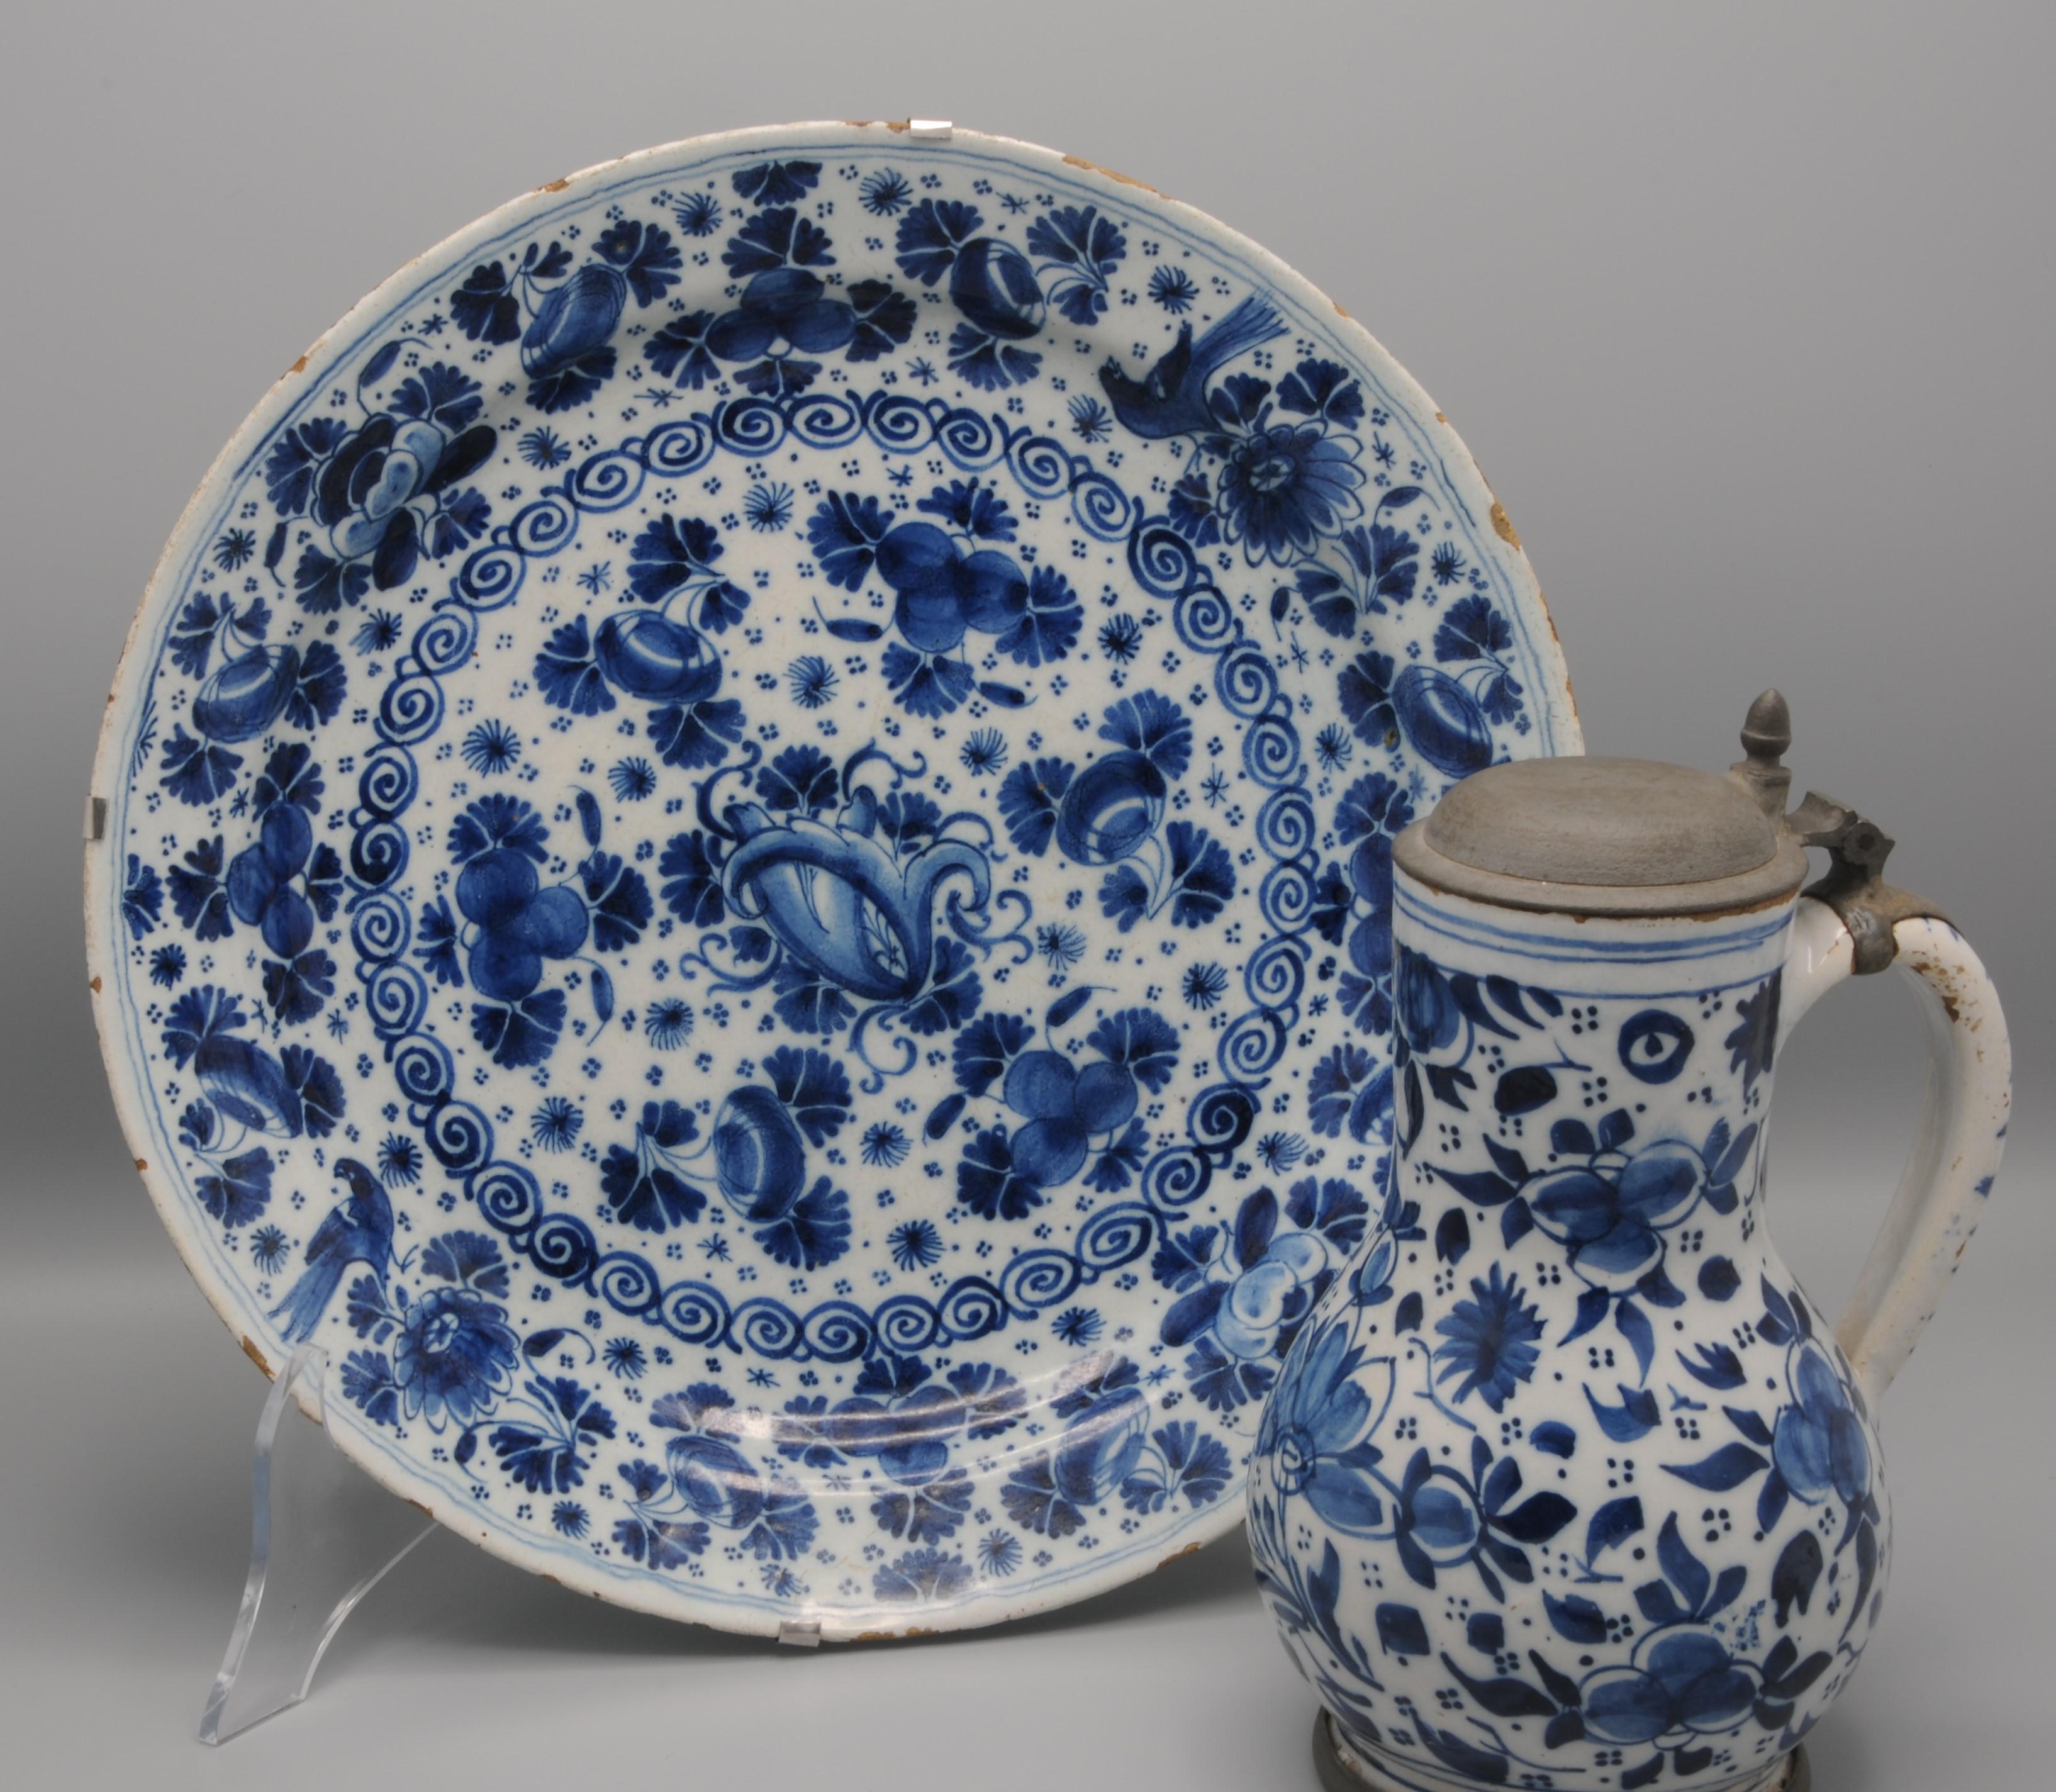 Pieter Kam, Delft - Large Charger with 'Parsley / mille fleurs' decor For Sale 5